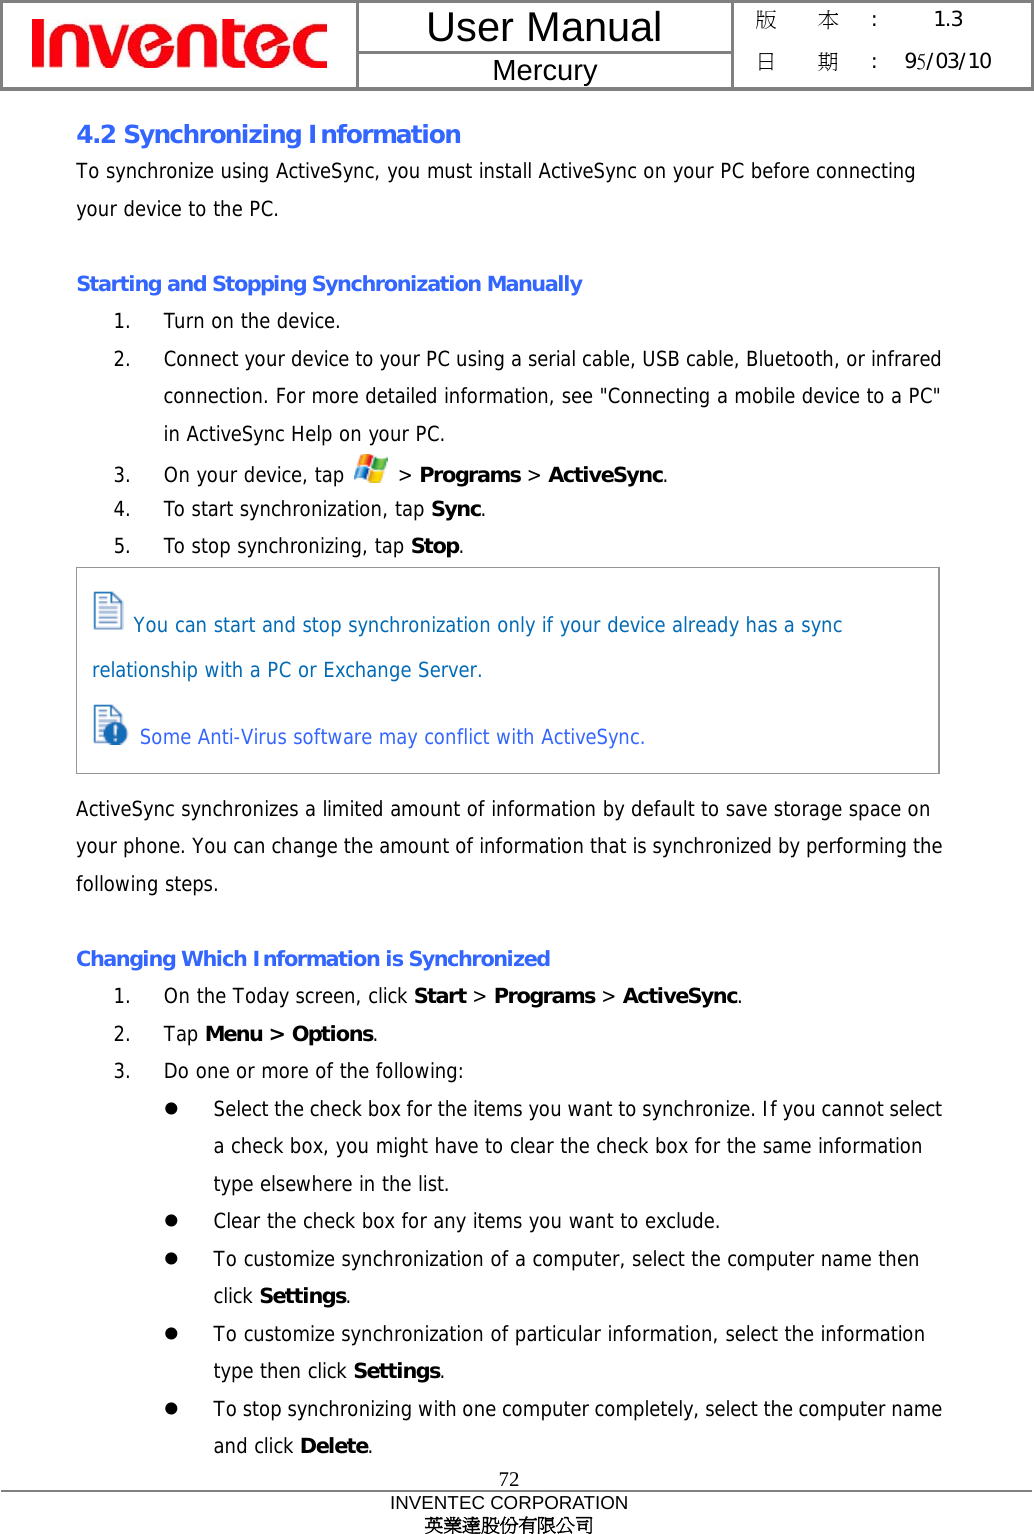 User Manual  Mercury 版    本 :  1.3 日    期 : 95/03/10  72 INVENTEC CORPORATION 英業達股份有限公司  4.2 Synchronizing Information To synchronize using ActiveSync, you must install ActiveSync on your PC before connecting your device to the PC.  Starting and Stopping Synchronization Manually 1.  Turn on the device. 2.  Connect your device to your PC using a serial cable, USB cable, Bluetooth, or infrared connection. For more detailed information, see &quot;Connecting a mobile device to a PC&quot; in ActiveSync Help on your PC. 3.  On your device, tap   &gt; Programs &gt; ActiveSync. 4.  To start synchronization, tap Sync. 5.  To stop synchronizing, tap Stop.       ActiveSync synchronizes a limited amount of information by default to save storage space on your phone. You can change the amount of information that is synchronized by performing the following steps.  Changing Which Information is Synchronized 1.  On the Today screen, click Start &gt; Programs &gt; ActiveSync. 2. Tap Menu &gt; Options. 3.  Do one or more of the following:   Select the check box for the items you want to synchronize. If you cannot select a check box, you might have to clear the check box for the same information type elsewhere in the list.   Clear the check box for any items you want to exclude.   To customize synchronization of a computer, select the computer name then click Settings.    To customize synchronization of particular information, select the information type then click Settings.   To stop synchronizing with one computer completely, select the computer name and click Delete.  You can start and stop synchronization only if your device already has a sync relationship with a PC or Exchange Server.  Some Anti-Virus software may conflict with ActiveSync. 